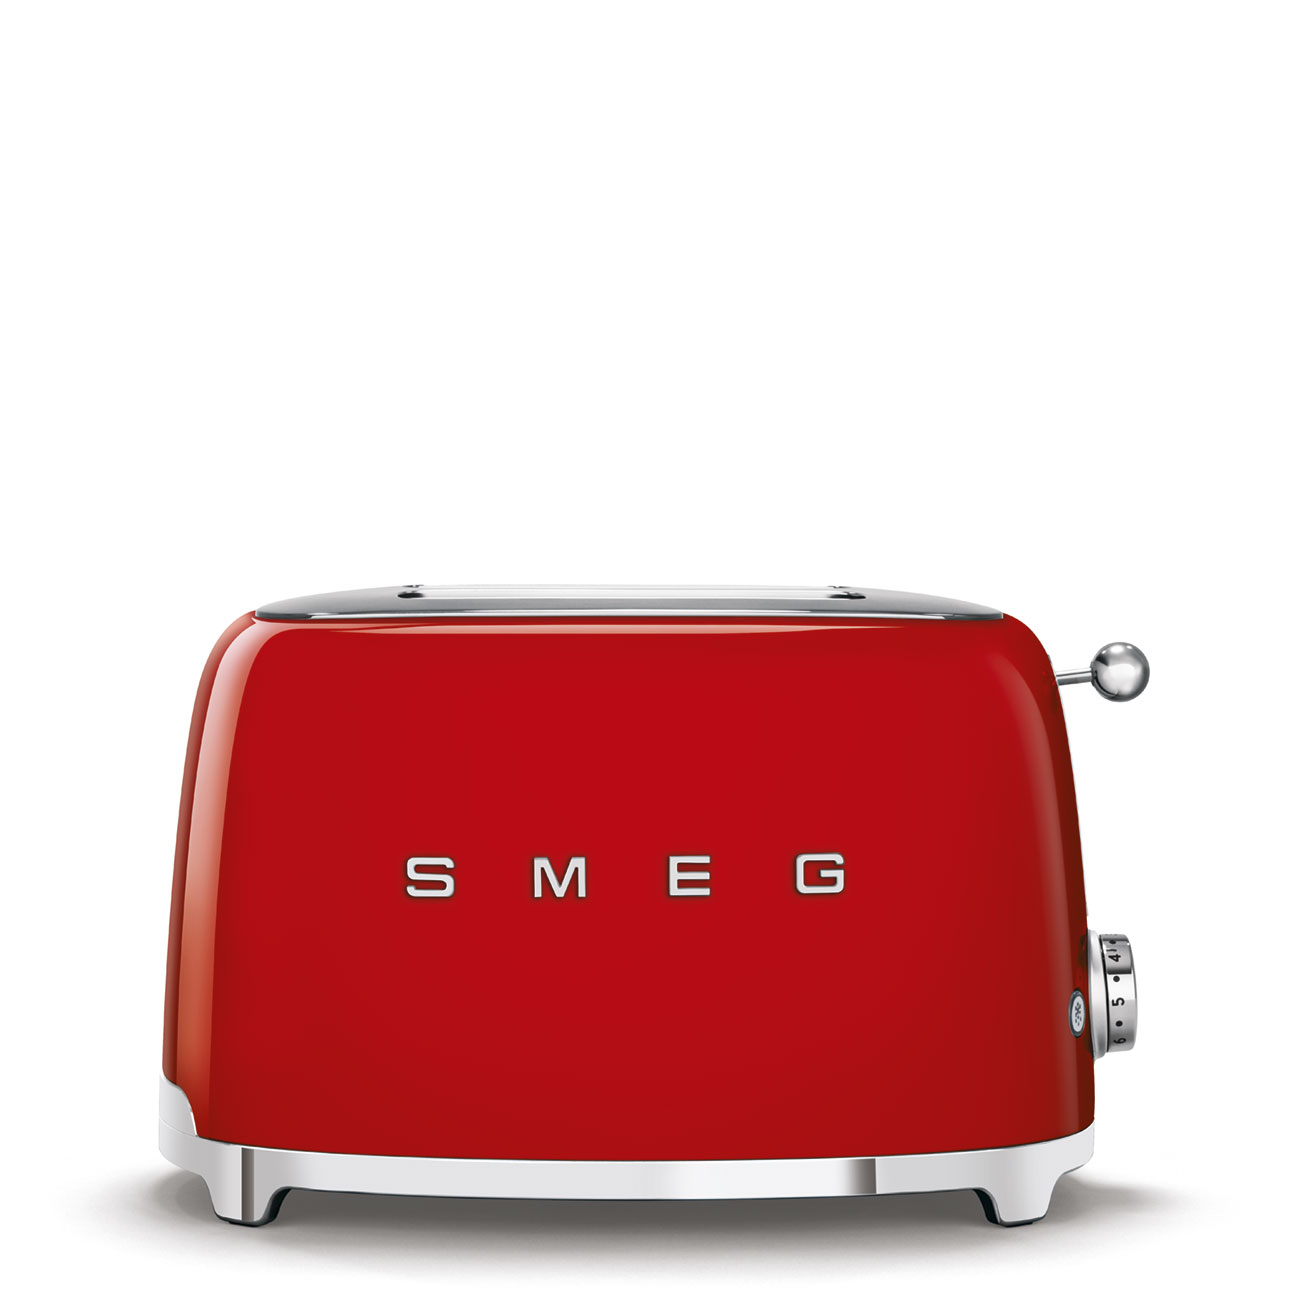 Red 2x1 Toaster - 4366